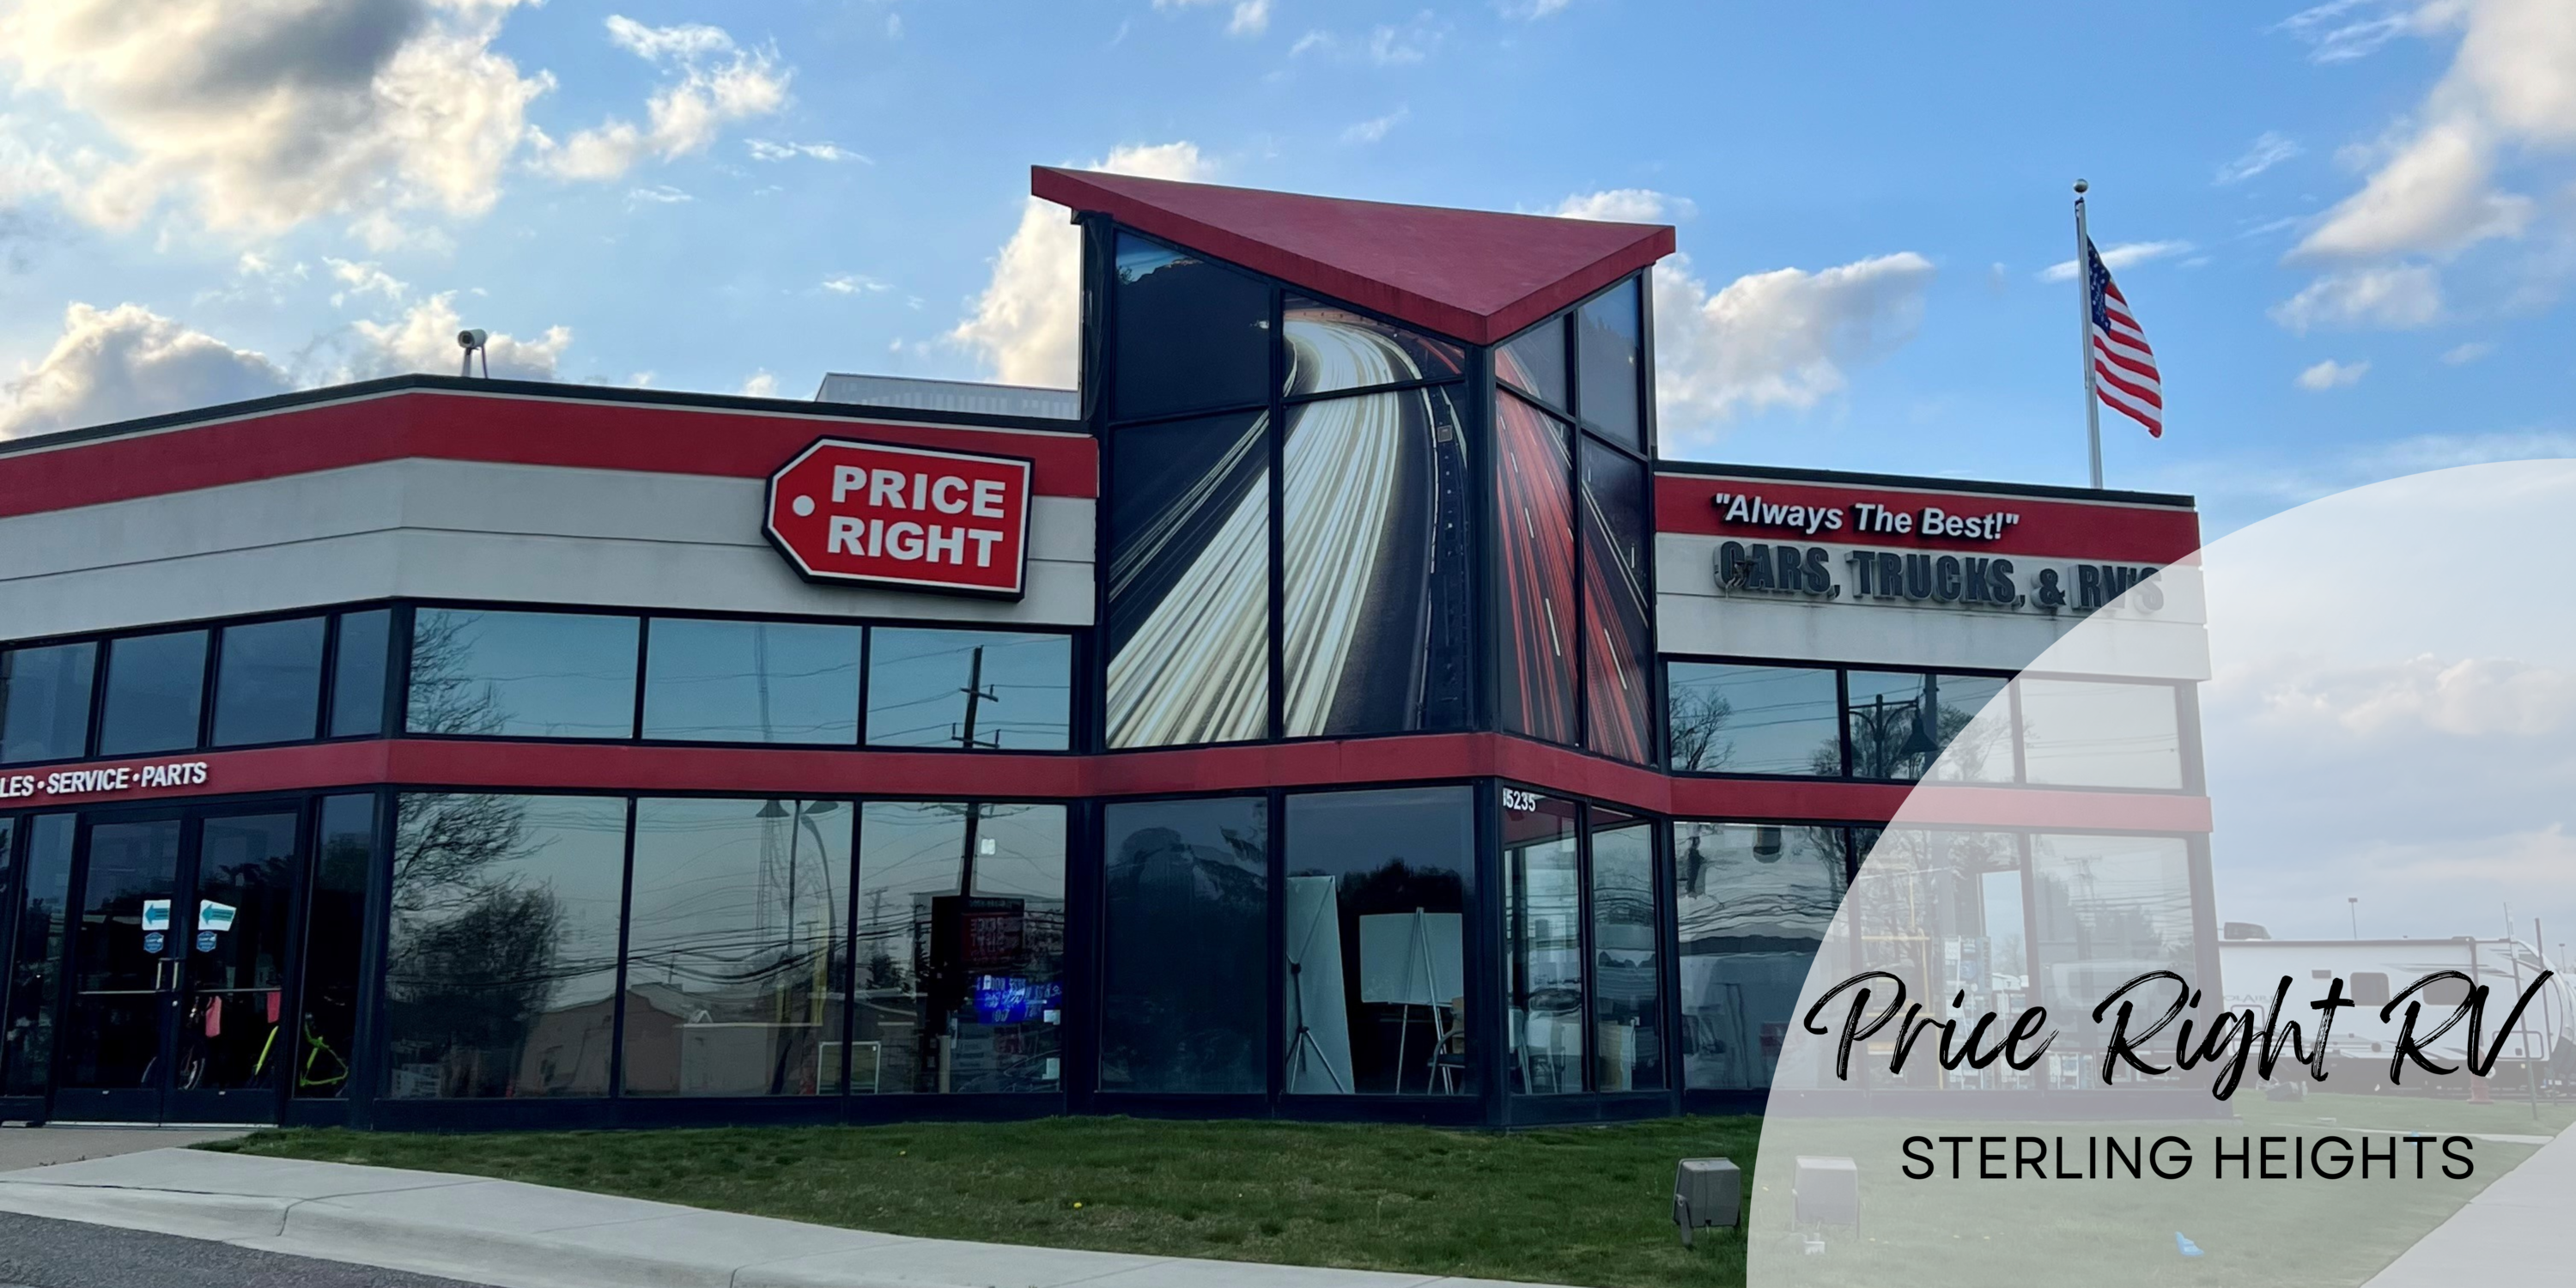 Price Right RV in Sterling Heights, MI RV Dealership Greater Detroit Michigan Number One RV Sales, Service and Parts